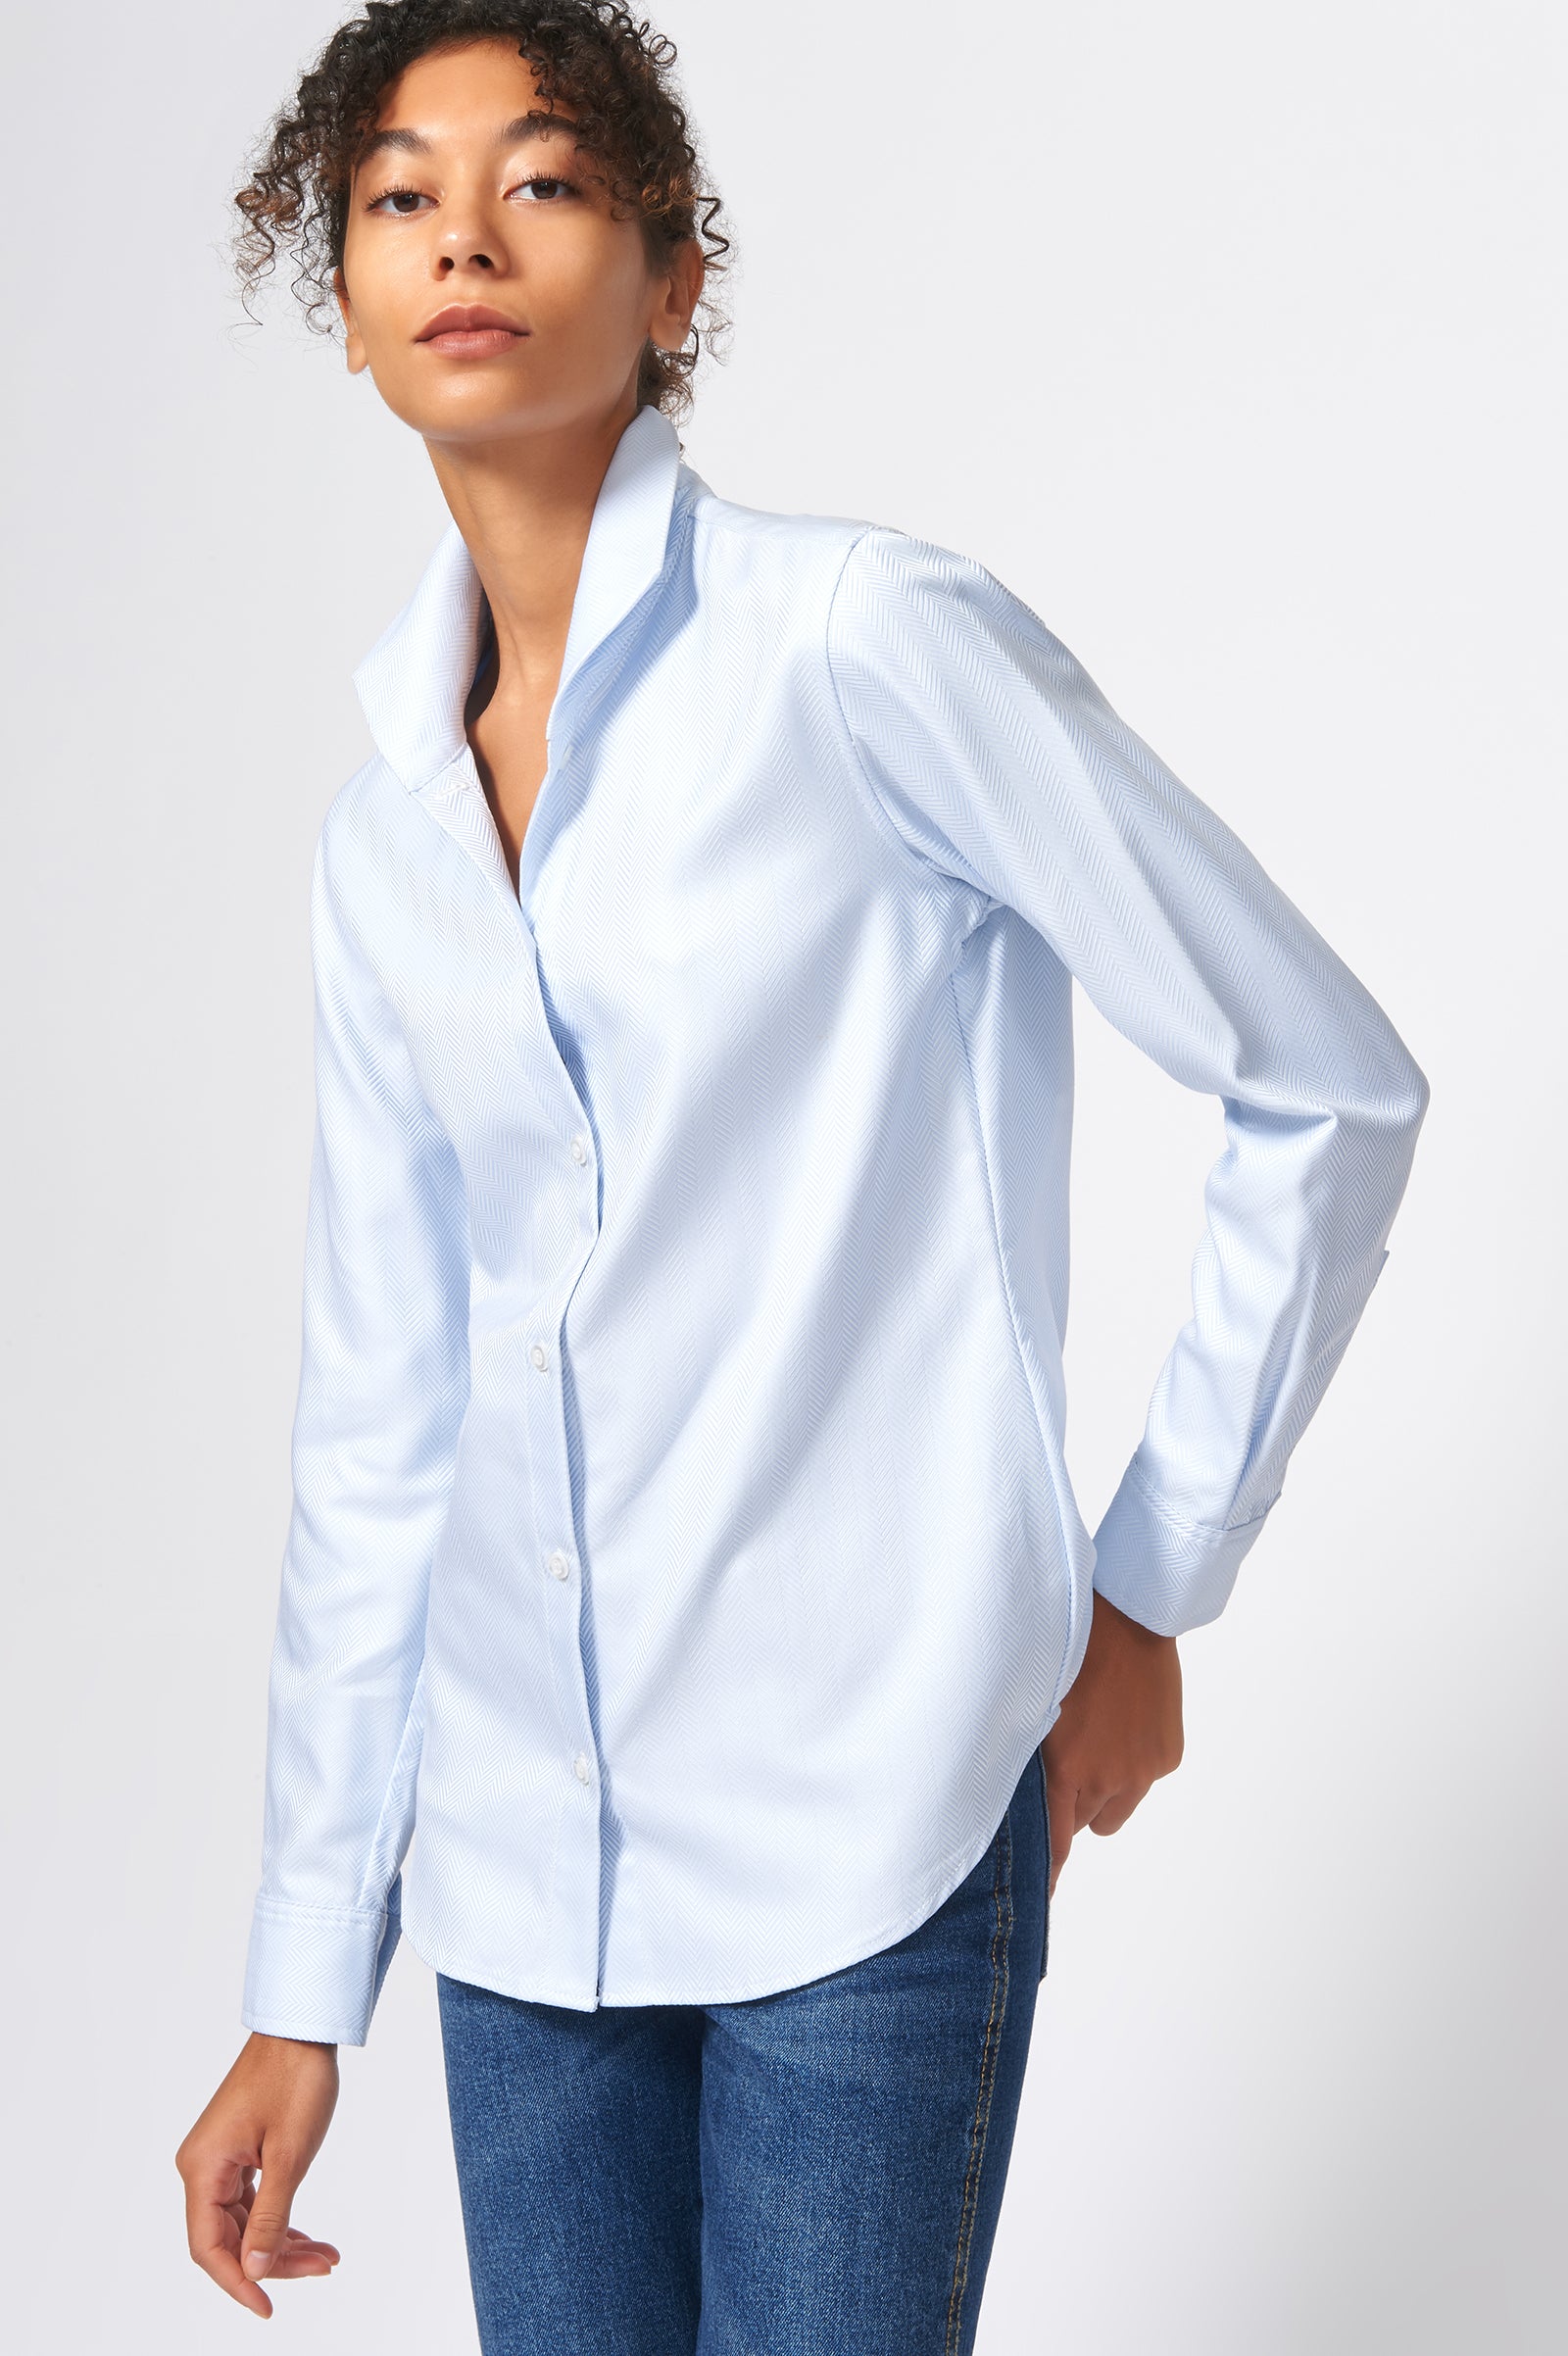 Kal Rieman Ginna Tailored Shirt in French Blue Herringbone on Model Front Side View